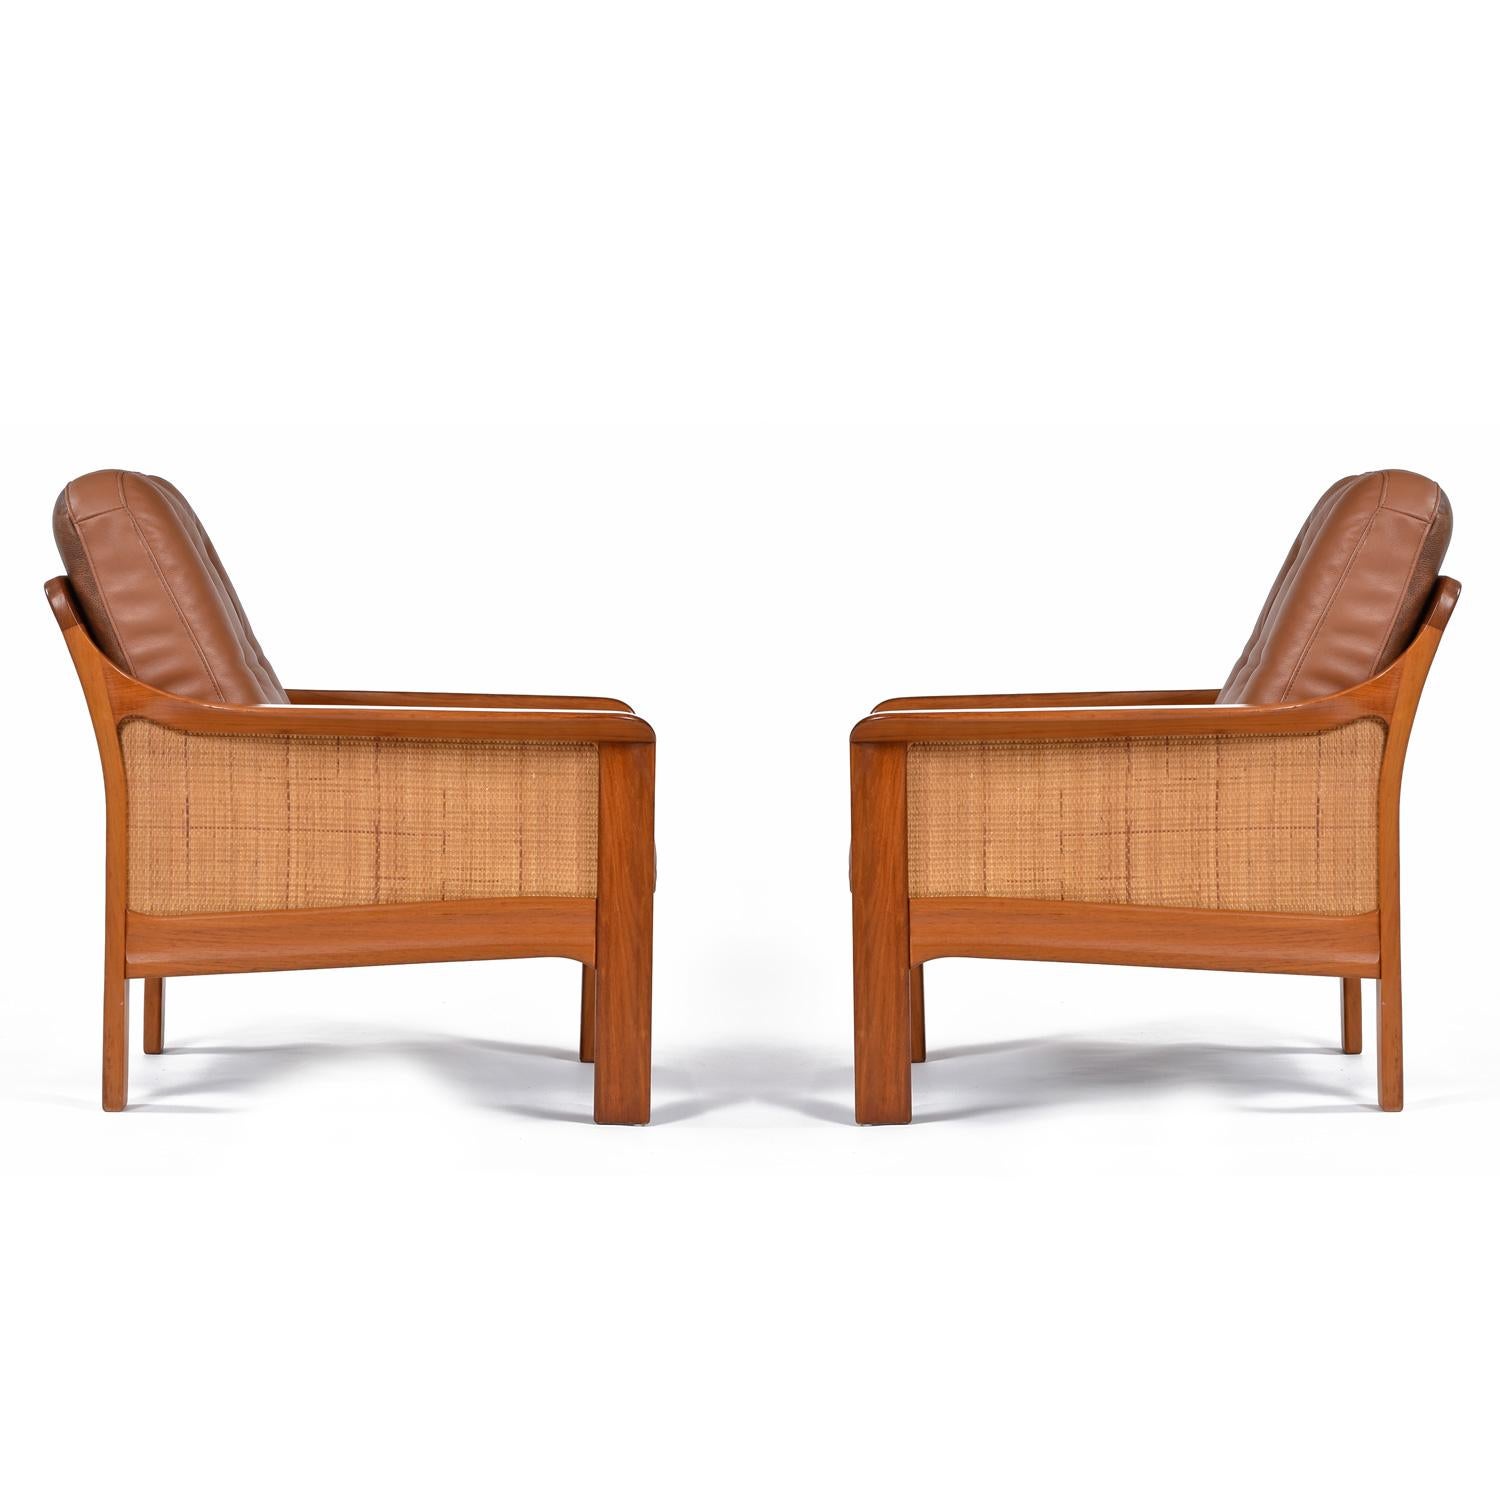 Tufted Leather Balinese Style Danish Modern Solid Teak and Cane Lounge Chair Set In Good Condition In Chattanooga, TN